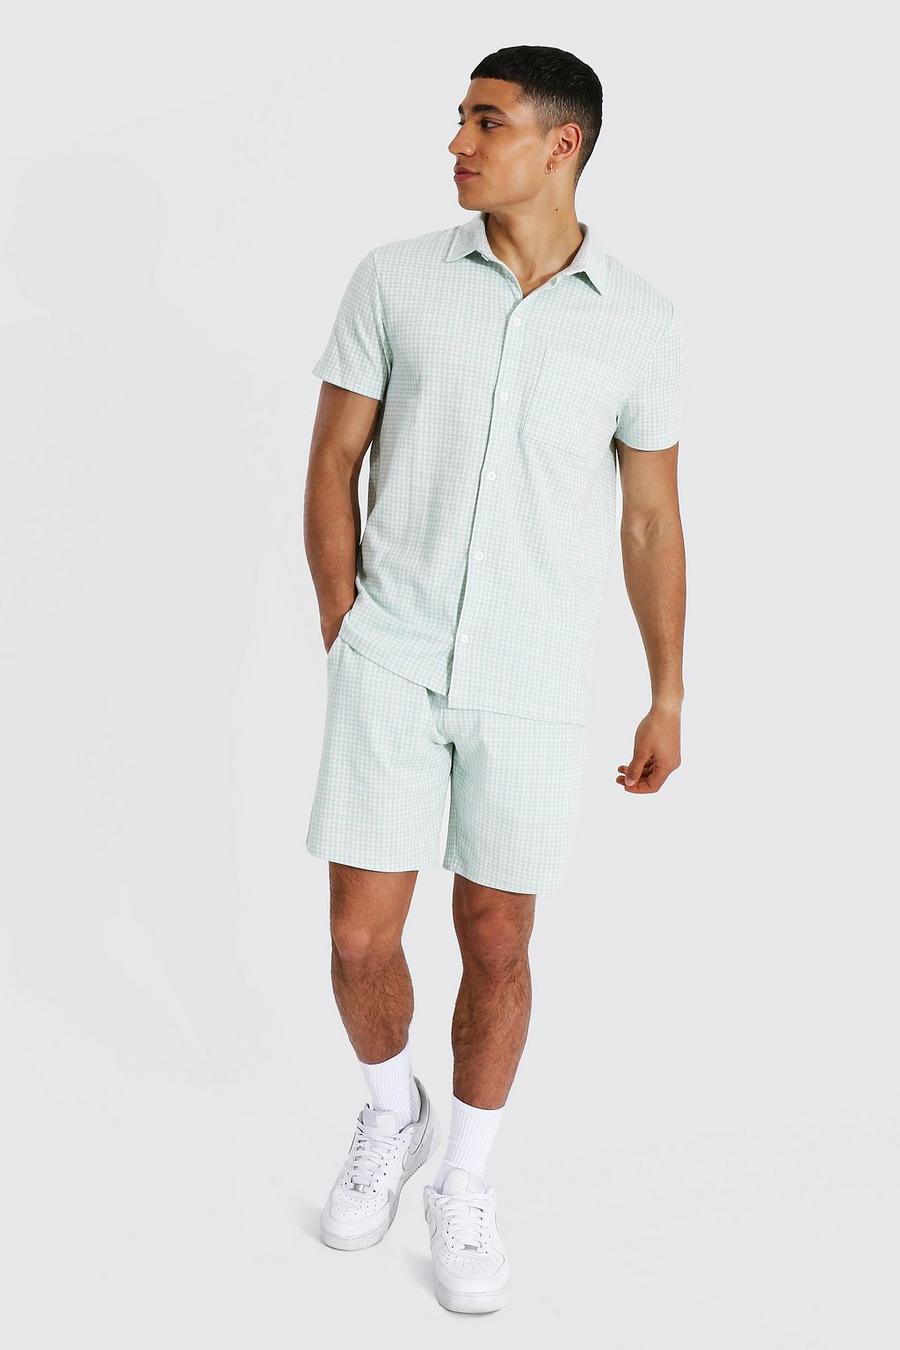 Mint Short Sleeve Flannel Jacquard Shirt And Shorts image number 1